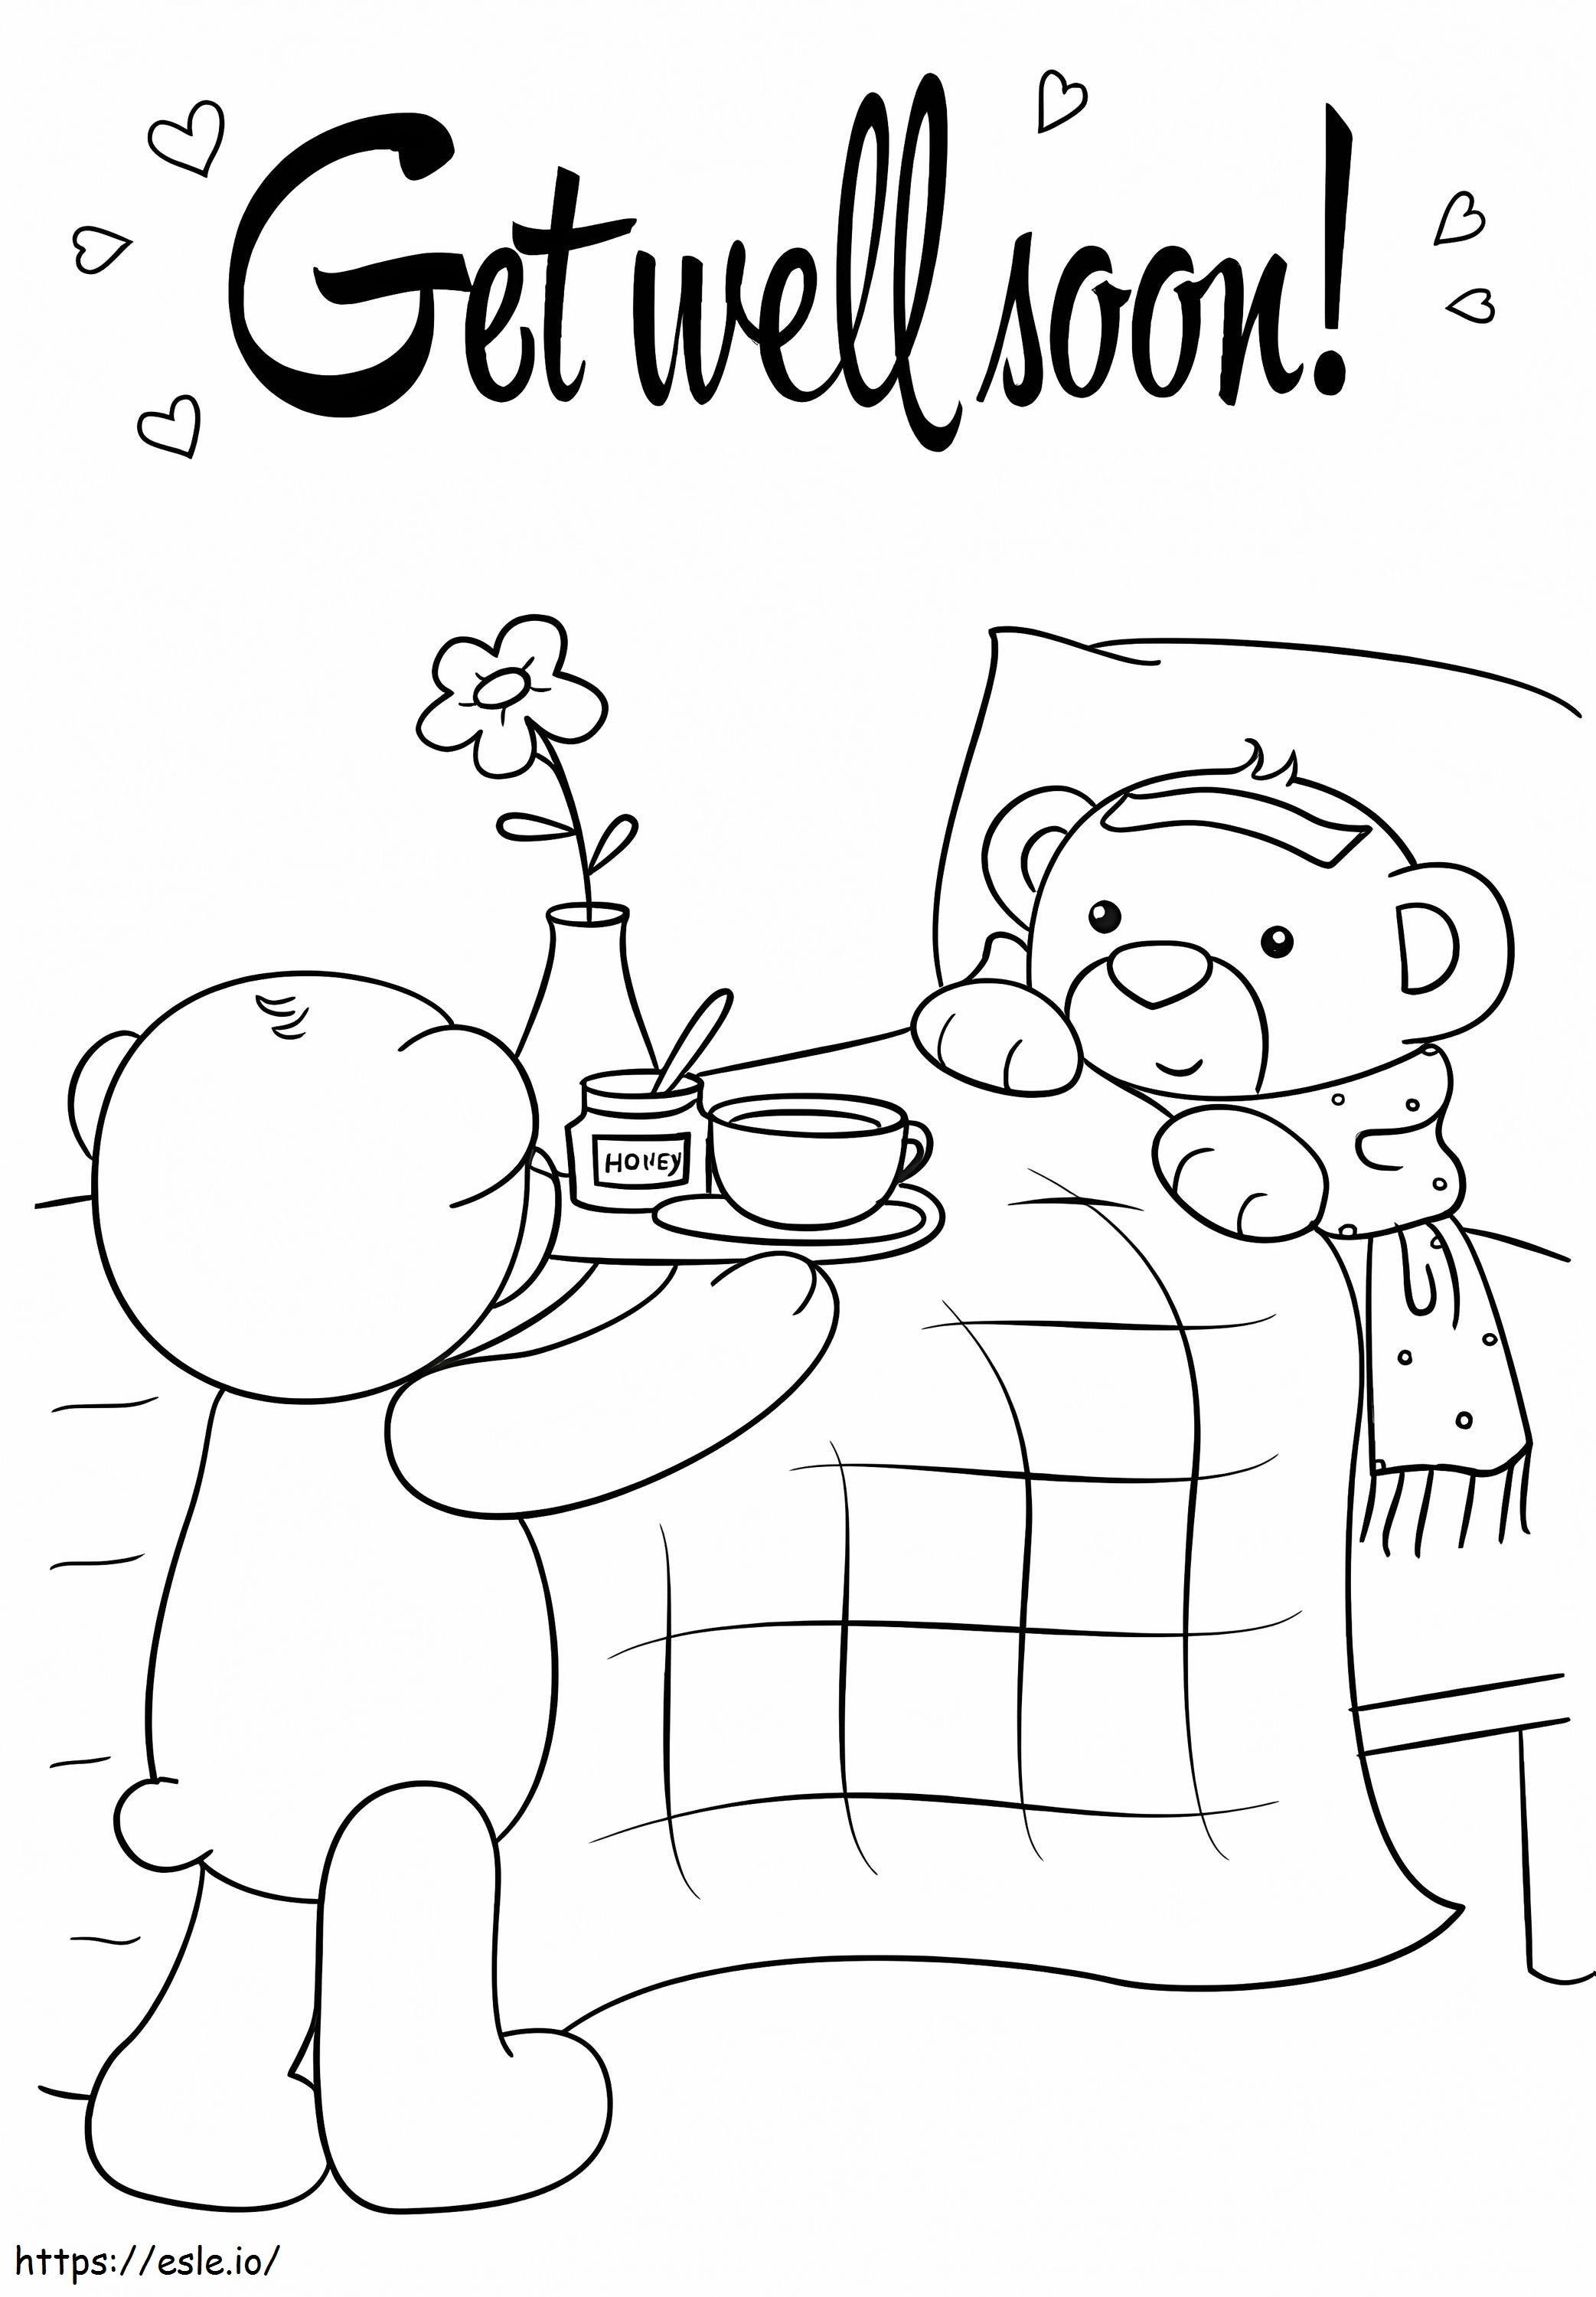 Get Well Soon In The Morning coloring page